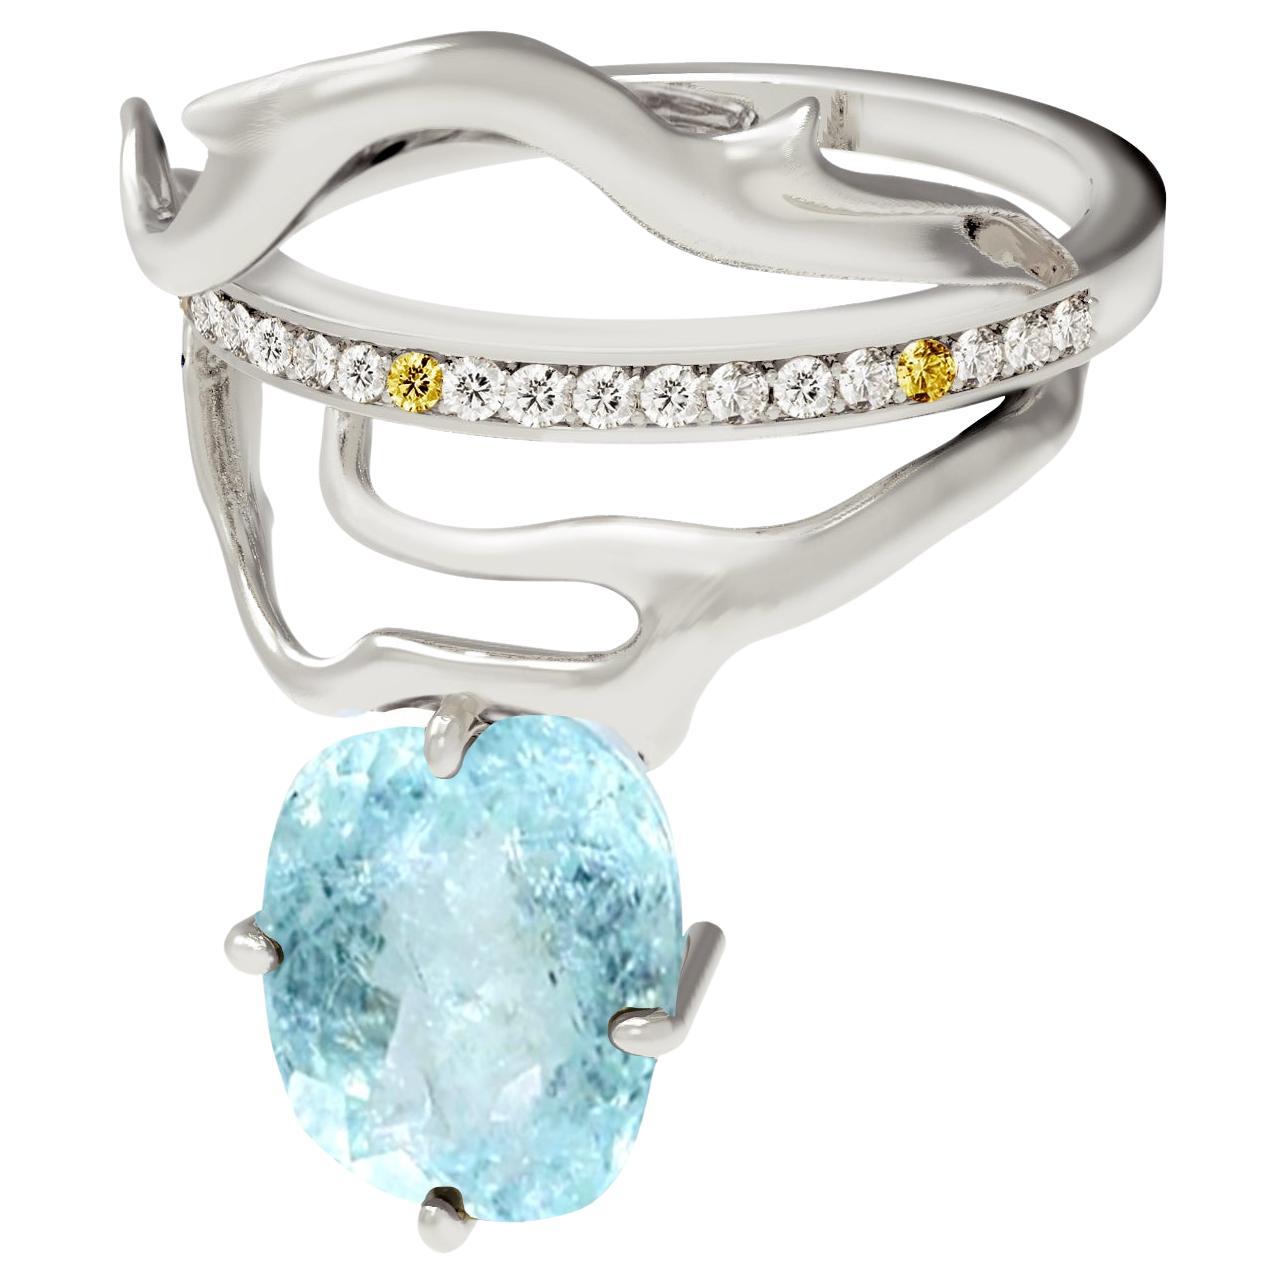 18 Karat White Gold Diamonds Ring with Paraiba Tourmaline and Sapphires For Sale